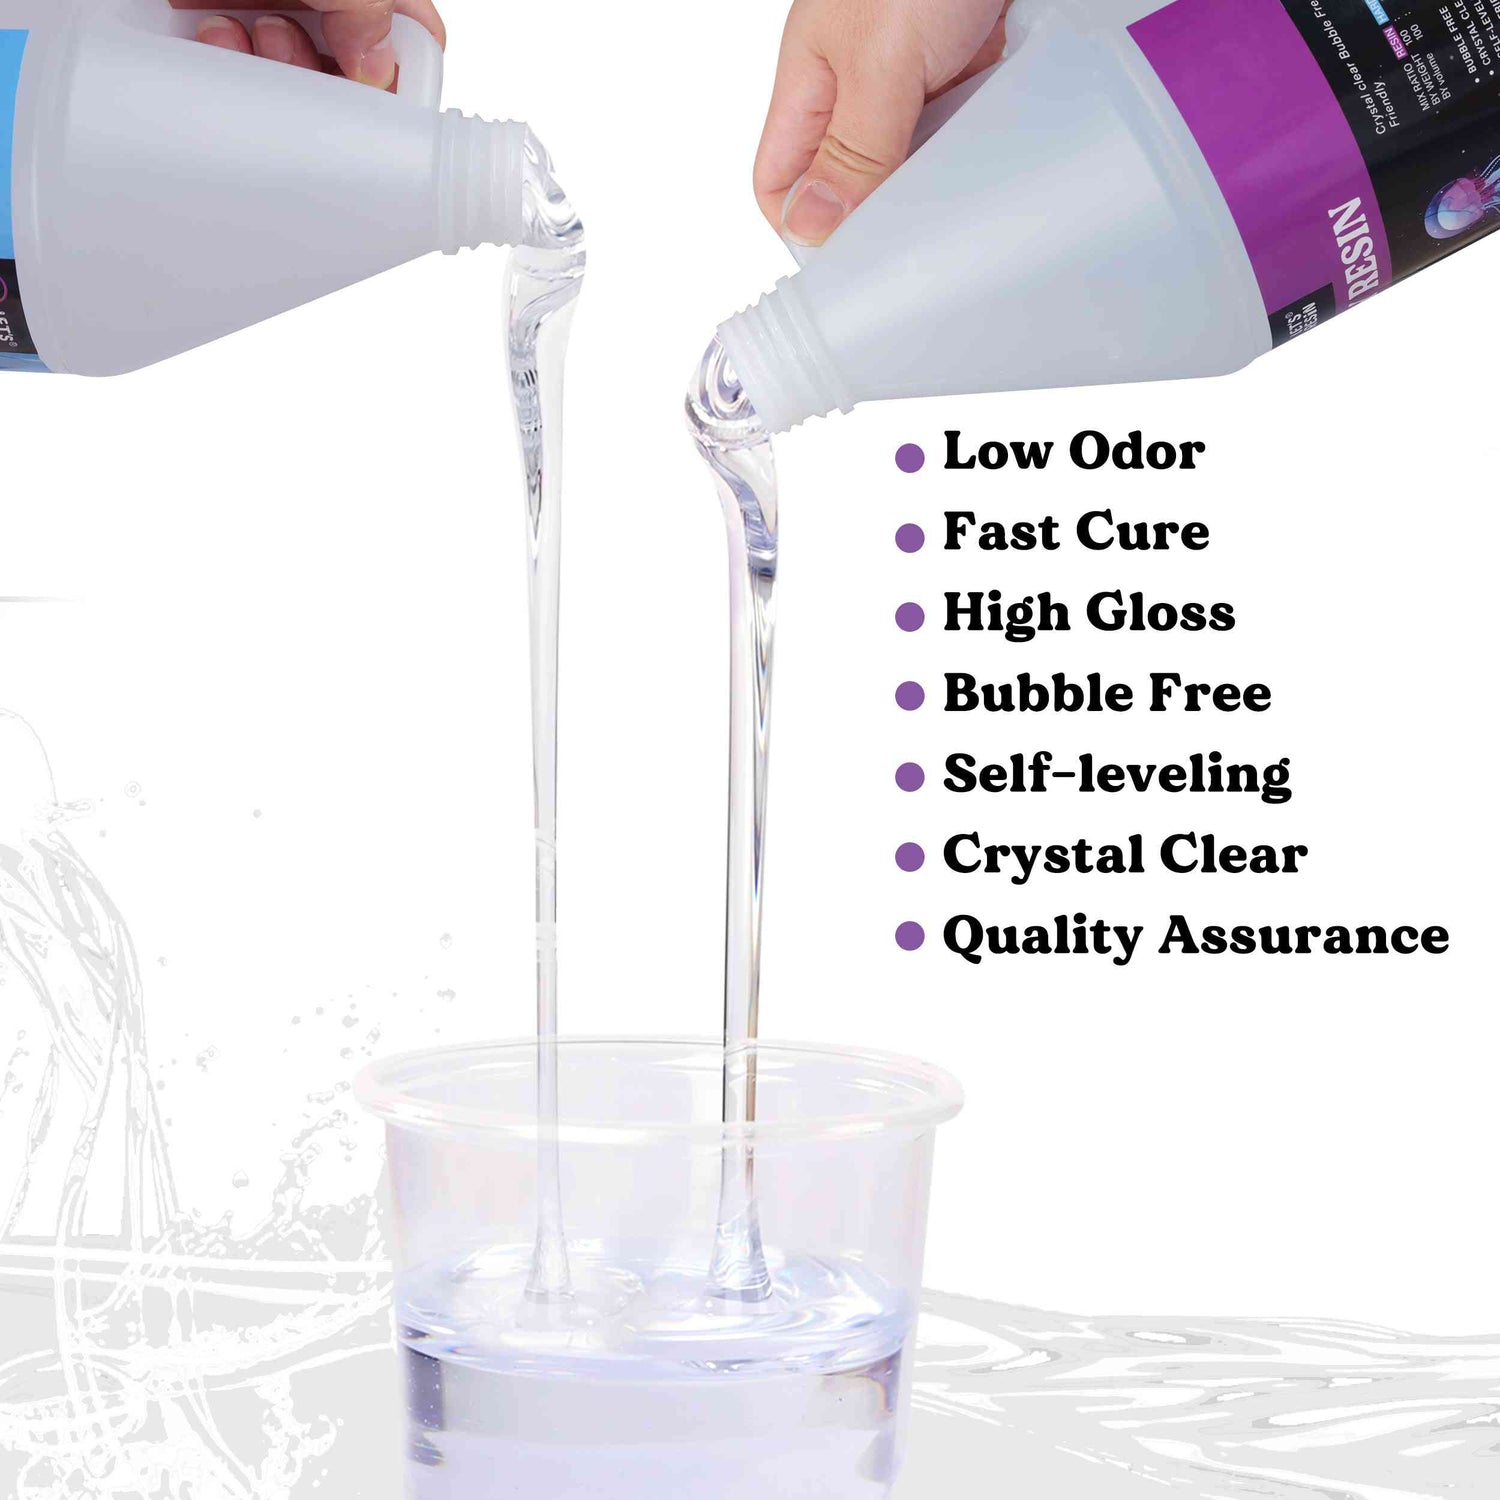 LET'S RESIN Resin Epoxy Kit, 1.5 Gallon Bubble Free & Crystal Clear Epoxy  Resin Supplies with Measuring Cups,Stir Stick,Gloves,Resin and Hardener for  Mold Casti…